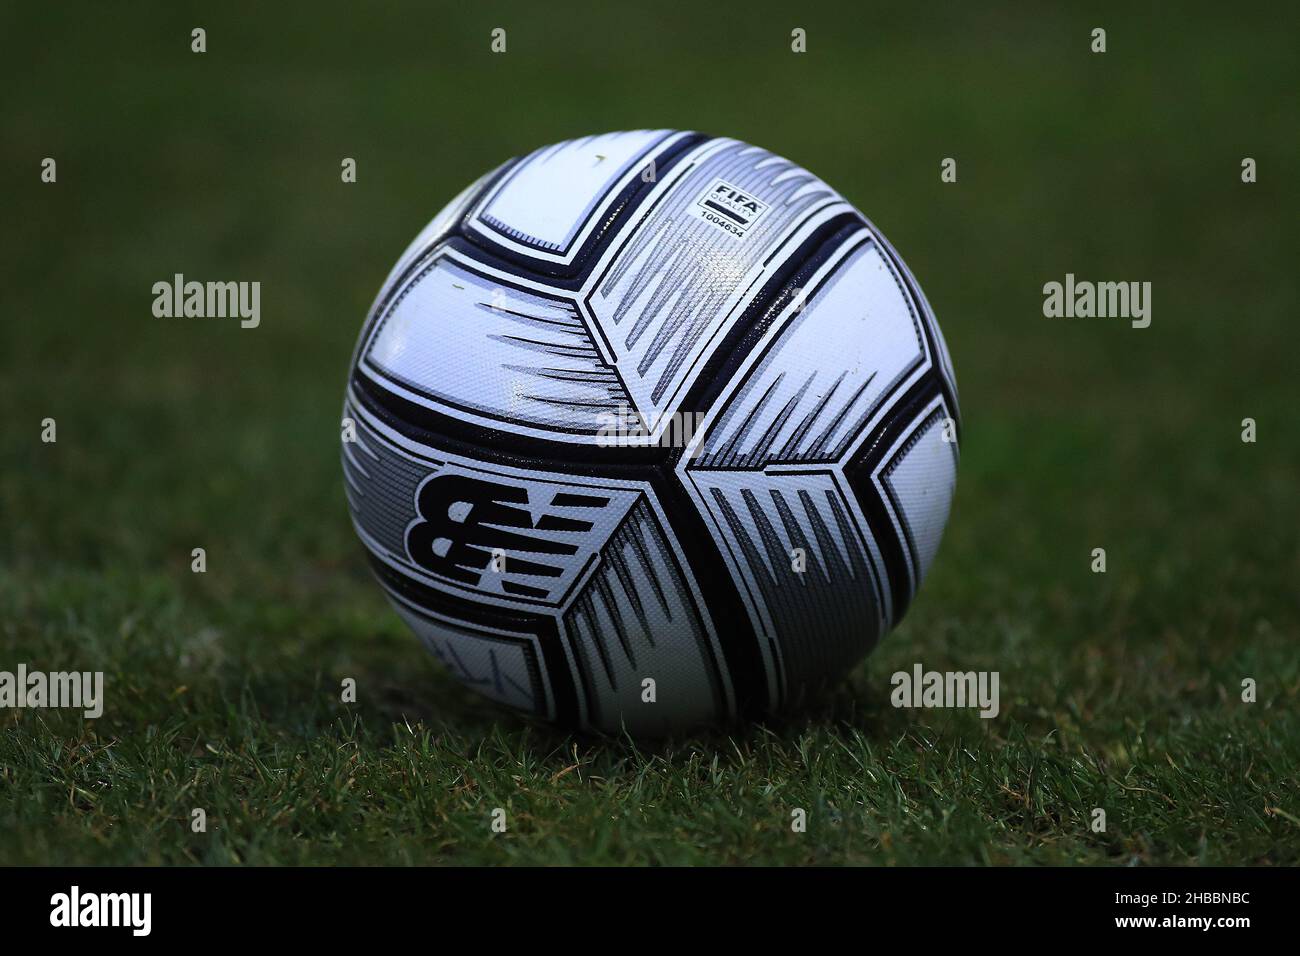 London, UK. 18th Dec, 2021. The New Balance national league match ball is  pictured. FA Trophy, 3rd round match, Barnet v Boreham Wood at the Hive  Stadium in London on Saturday 18th